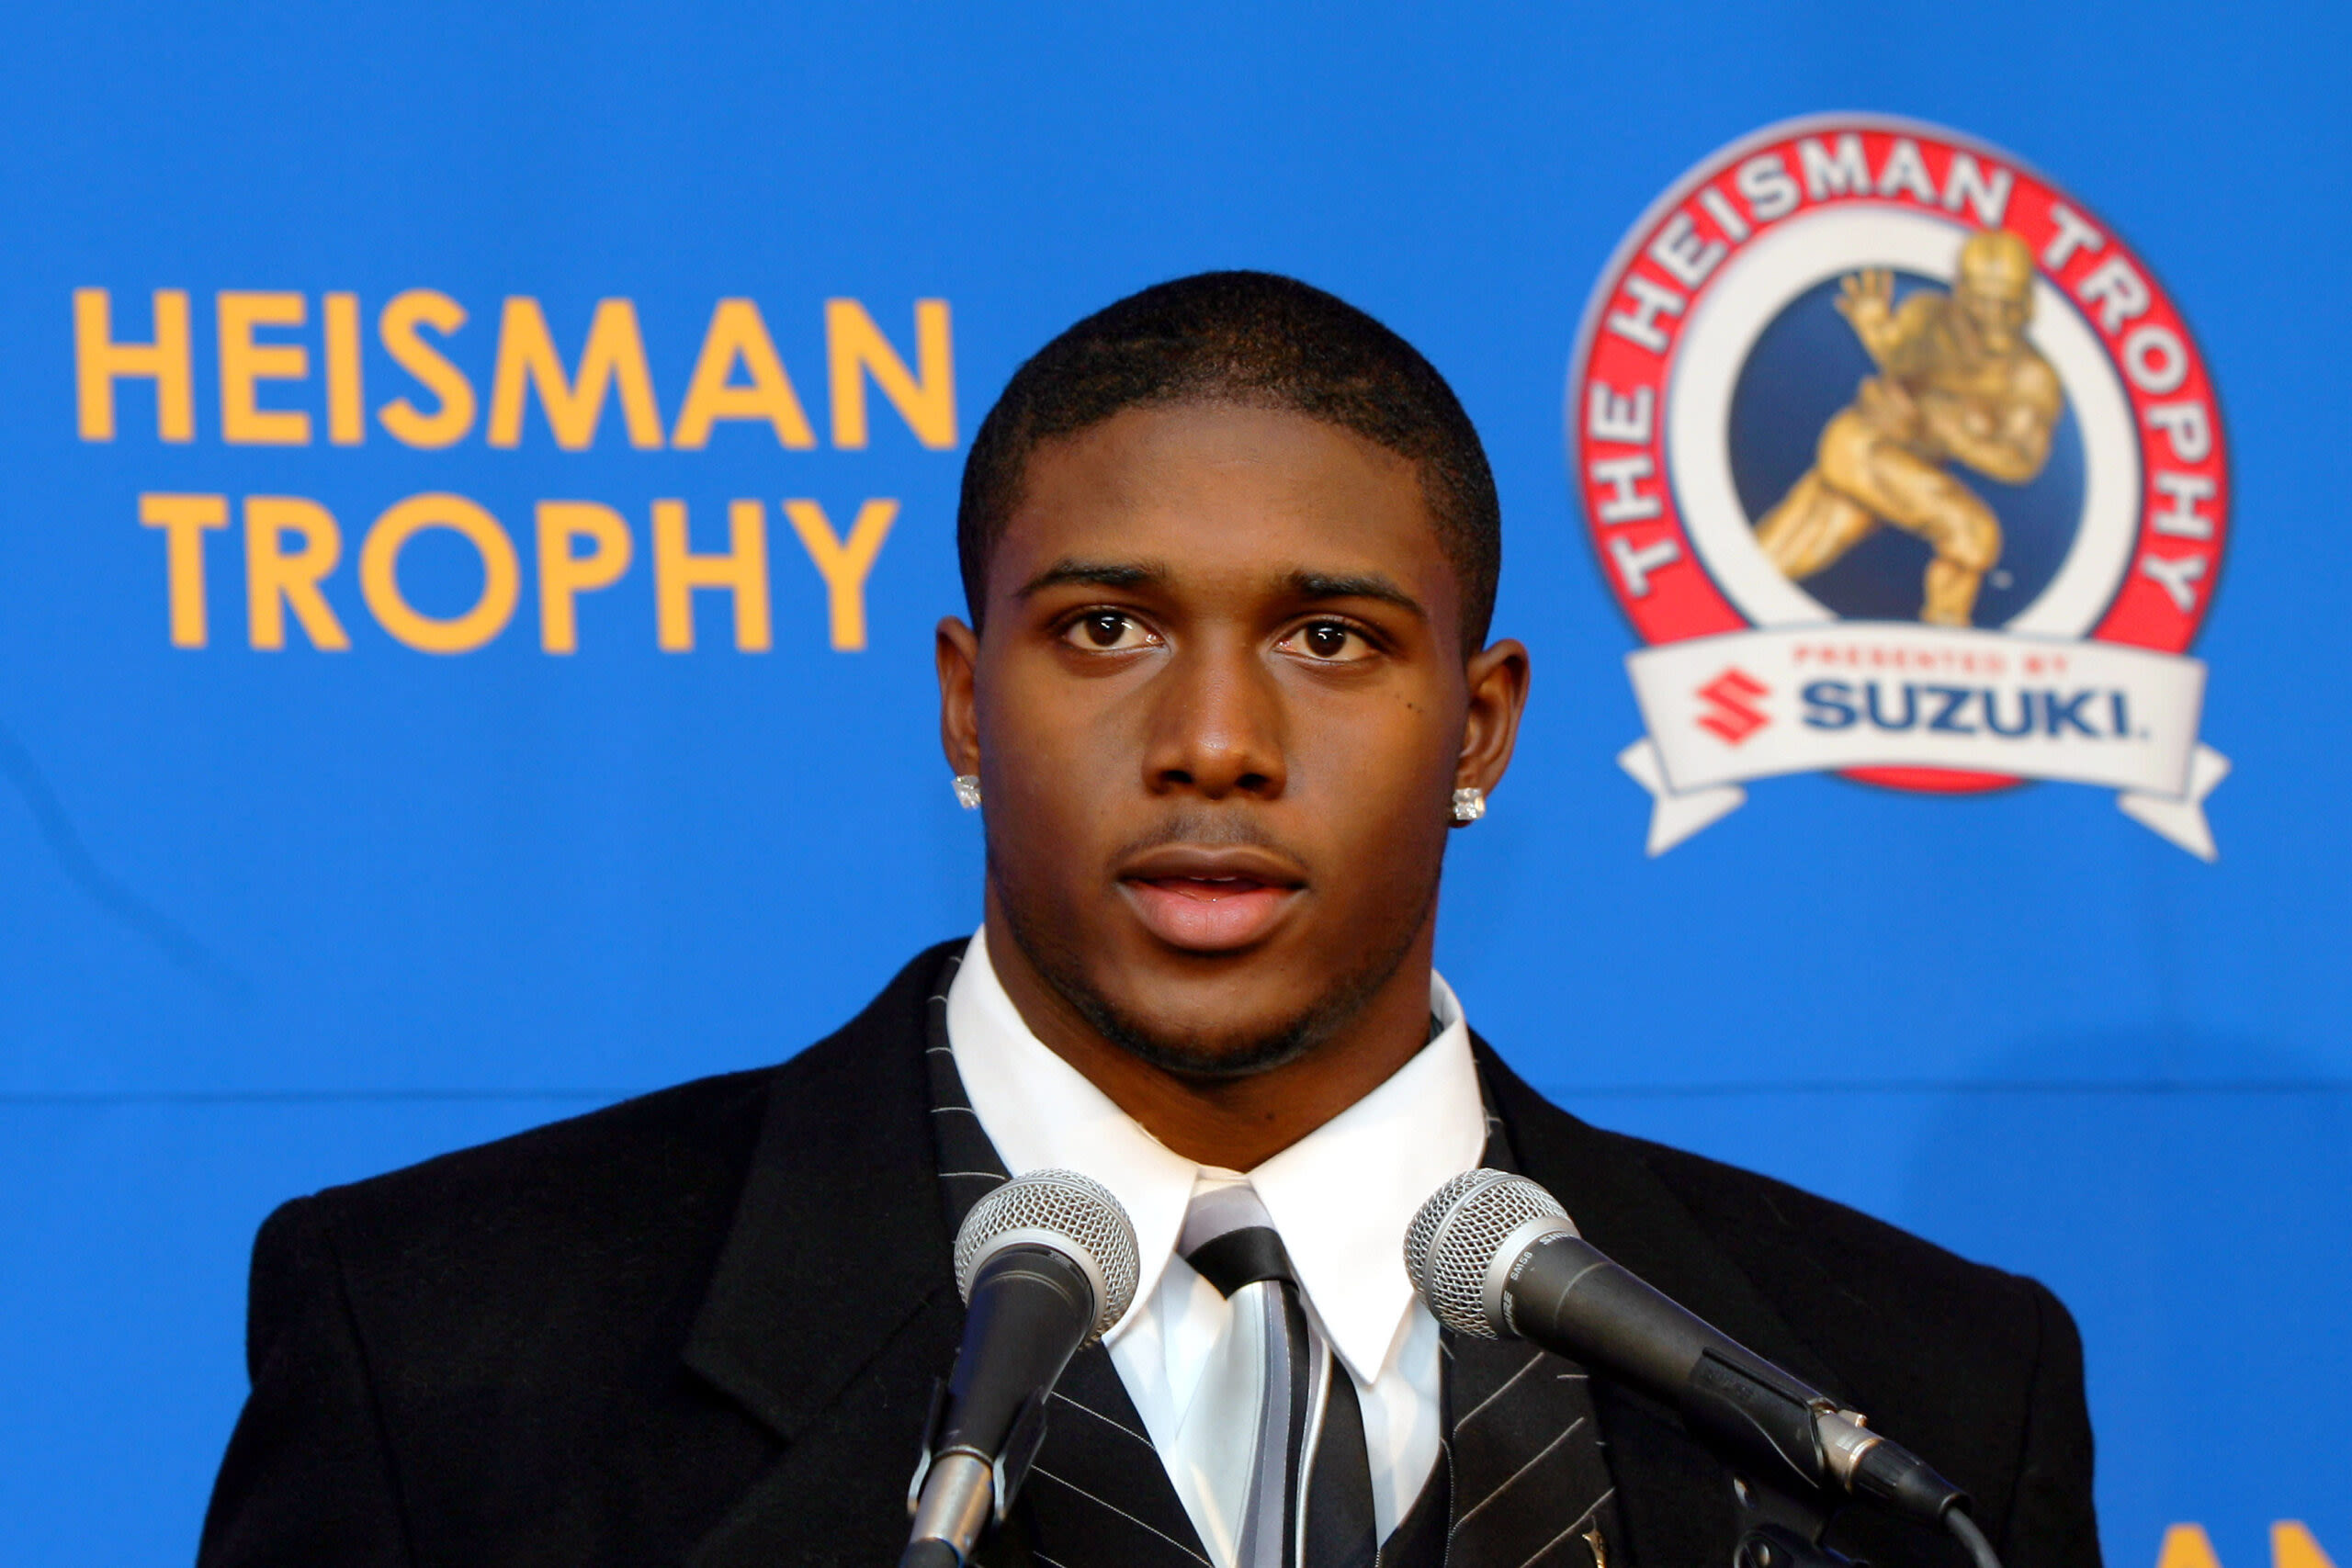 Reggie Bush clears first hurdle in defamation suit against NCAA